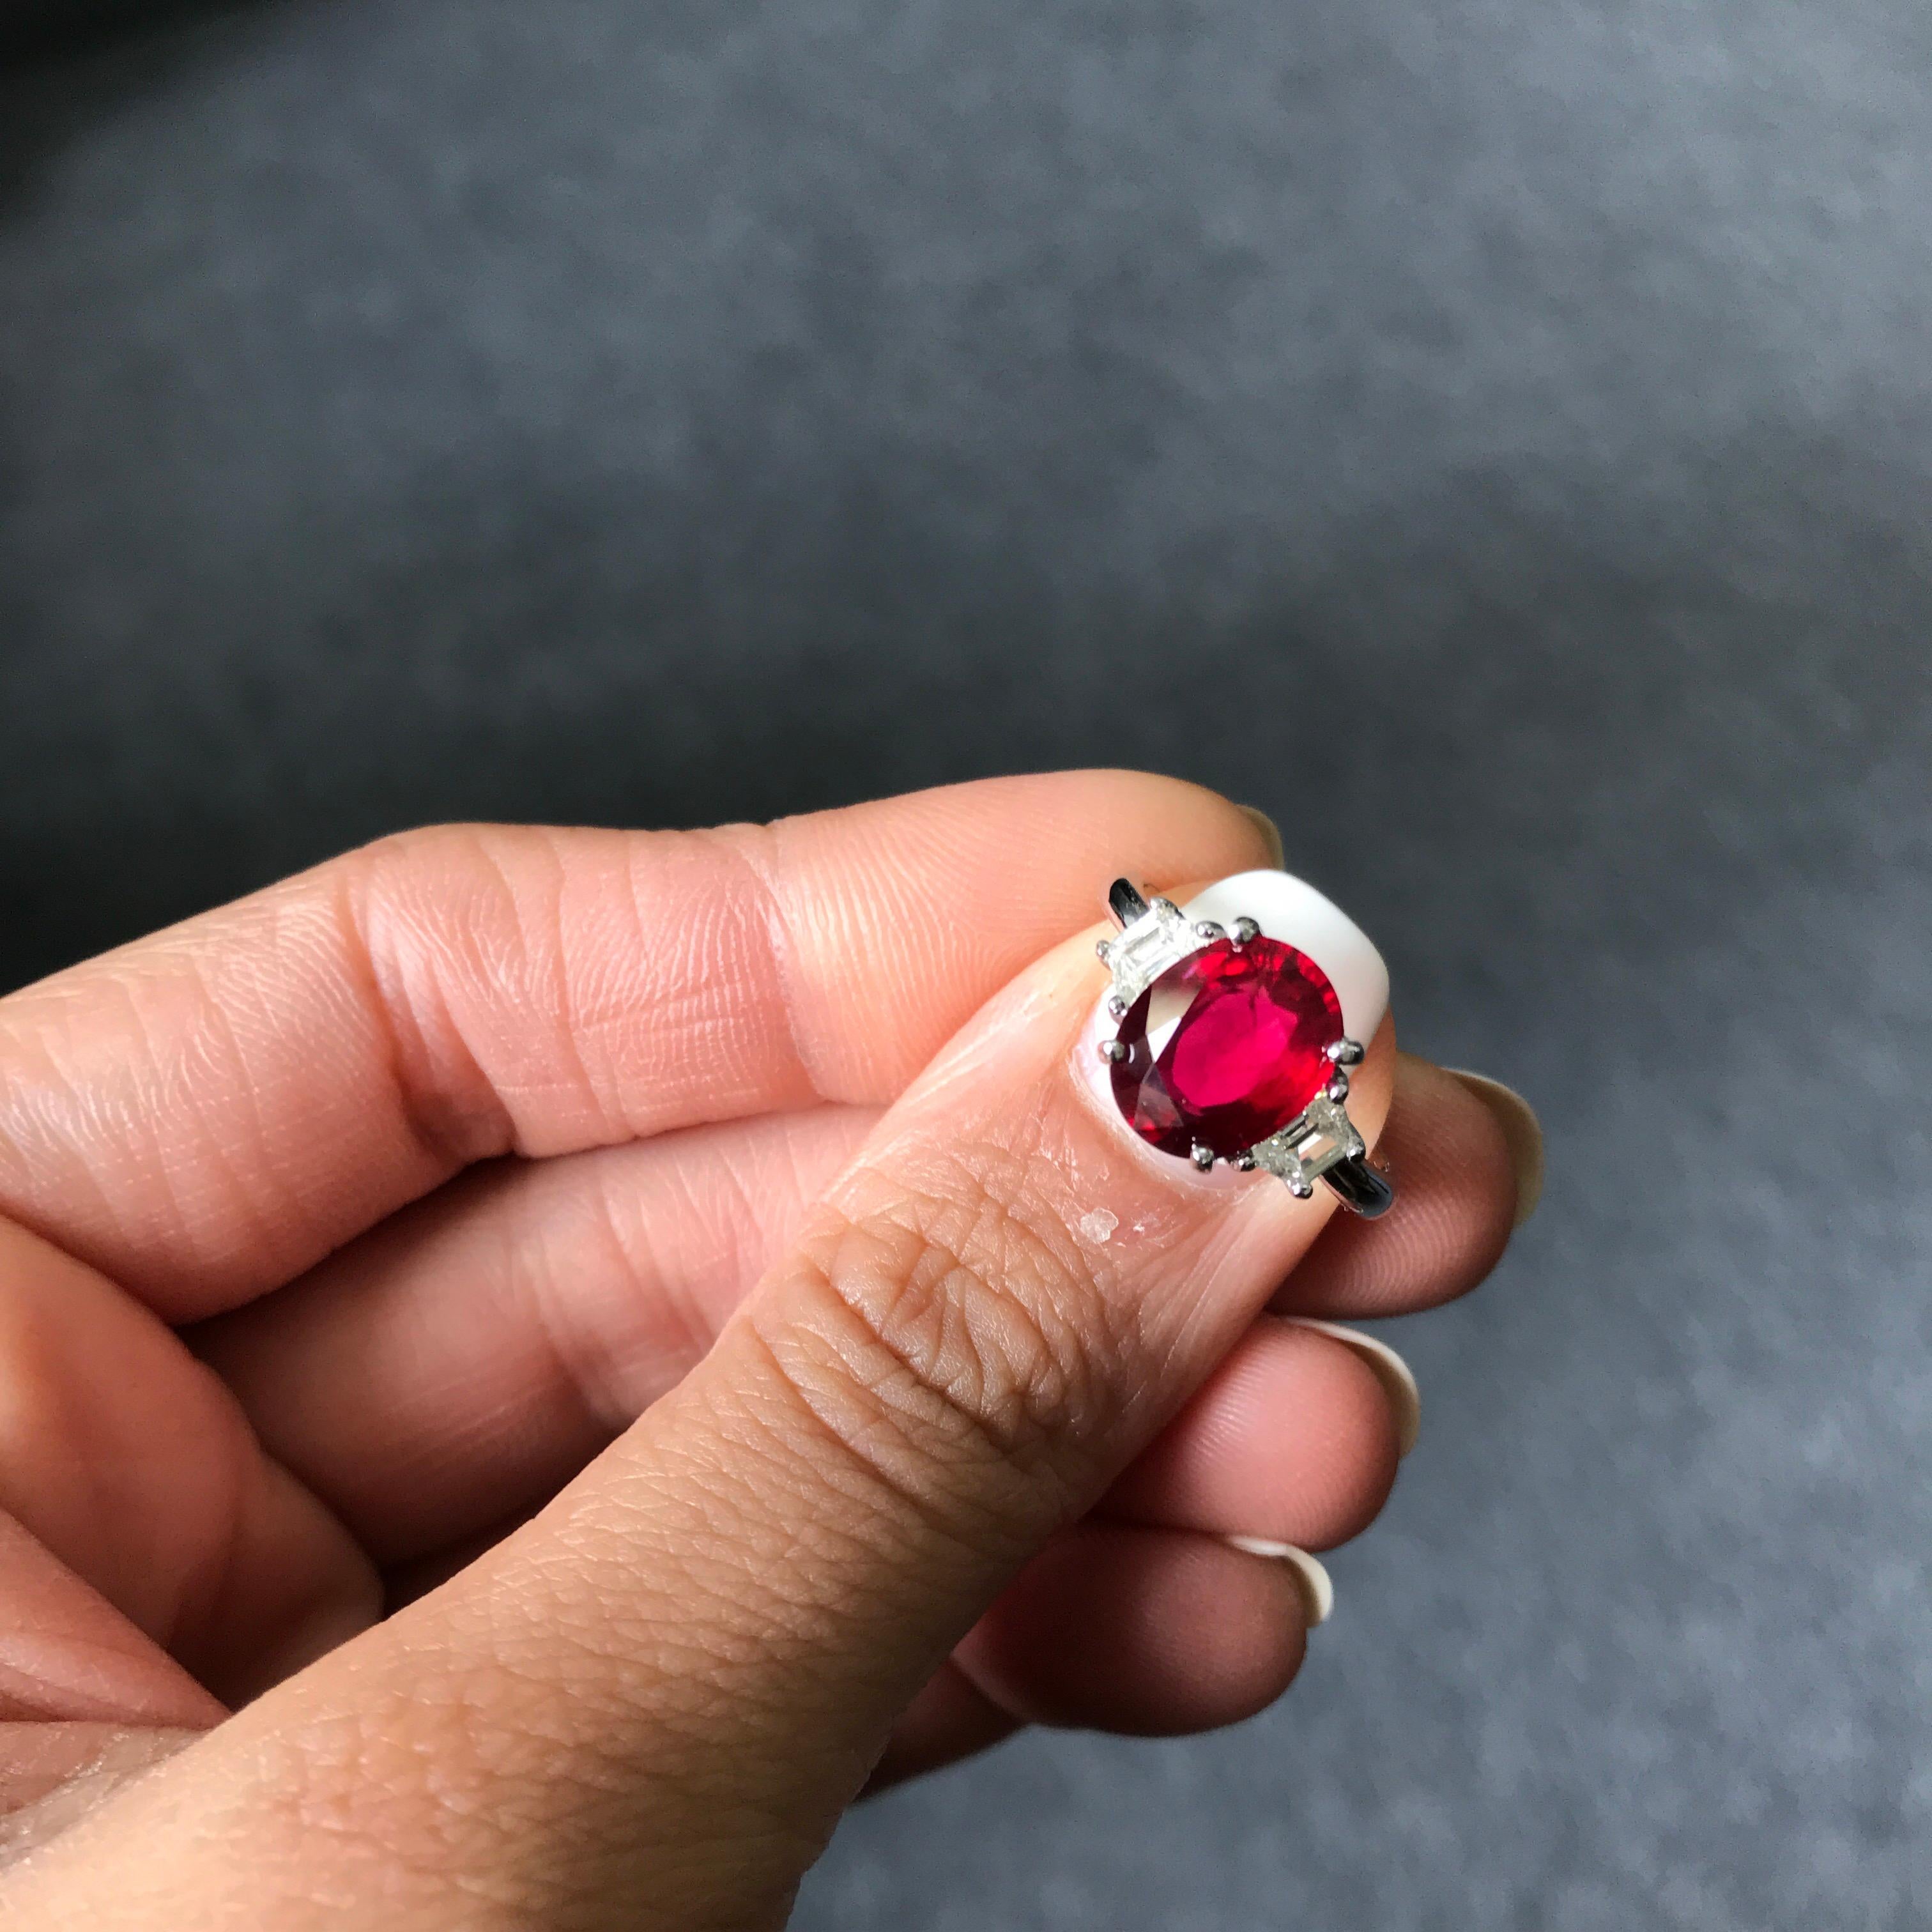 A beautiful three stone, engagement ring, with a 3.07 carat top quality and great colour oval cut Mozambique Ruby centre stone. 2 half-moon 0.40 carat side stones (total) Diamonds are set next to the centre stone, all set in 18K White Gold.